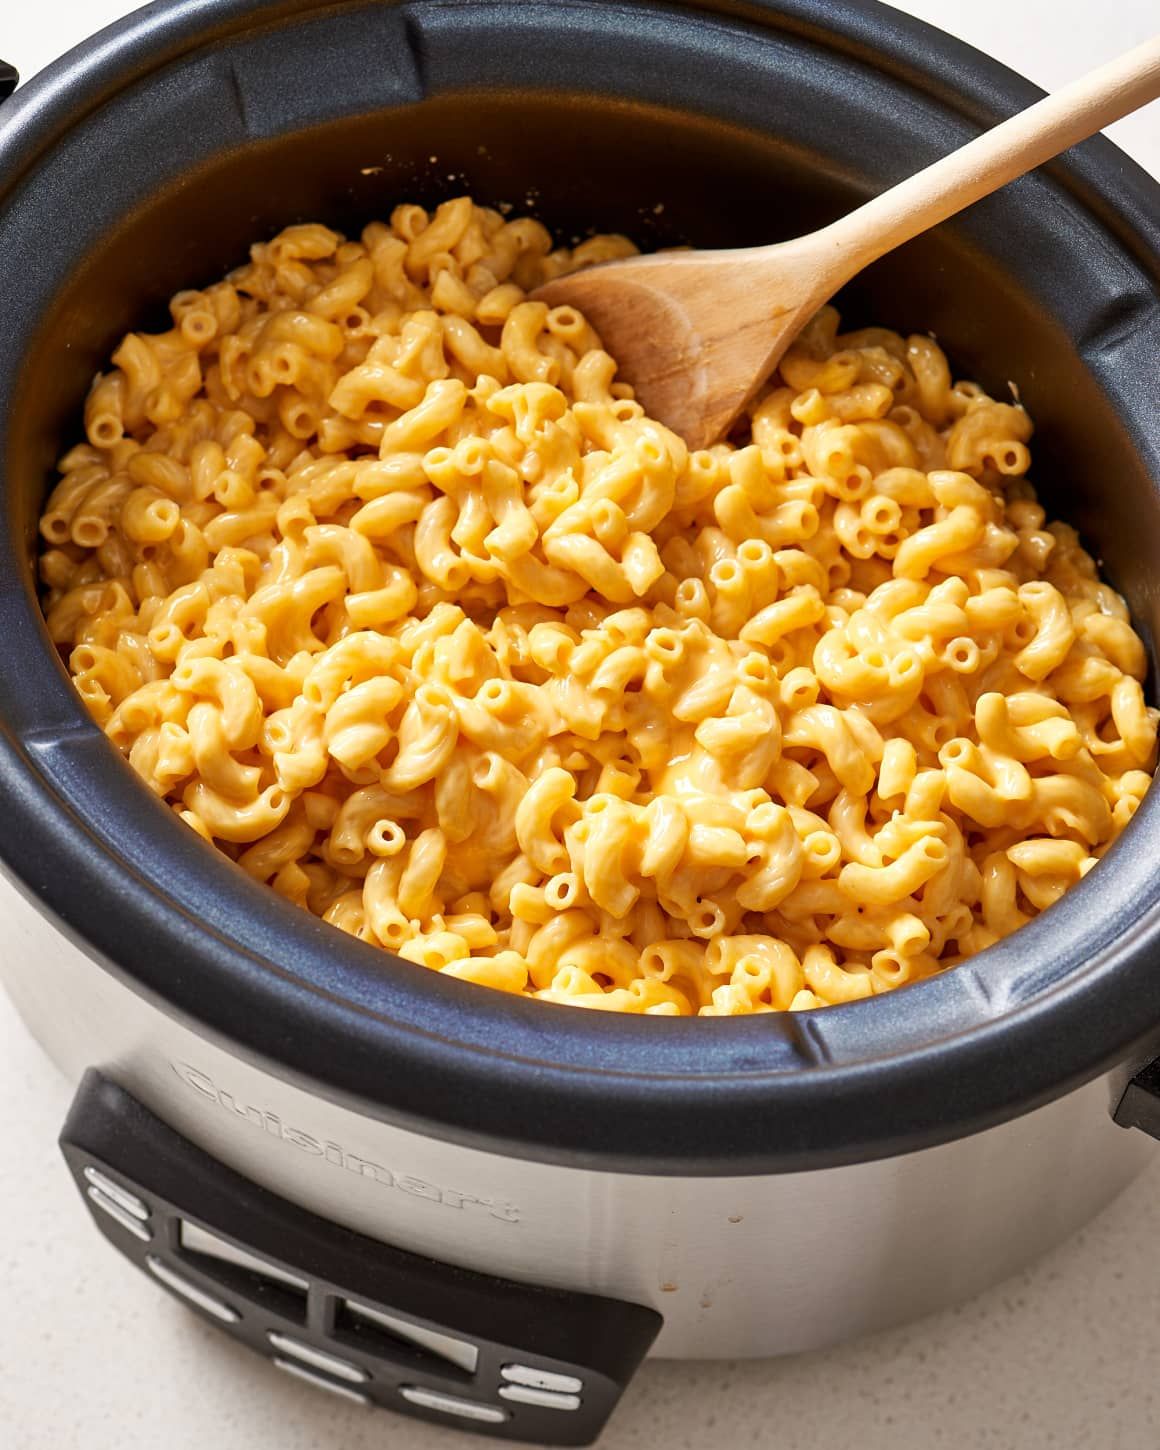 How To Make Mac and Cheese in the Slow Cooker